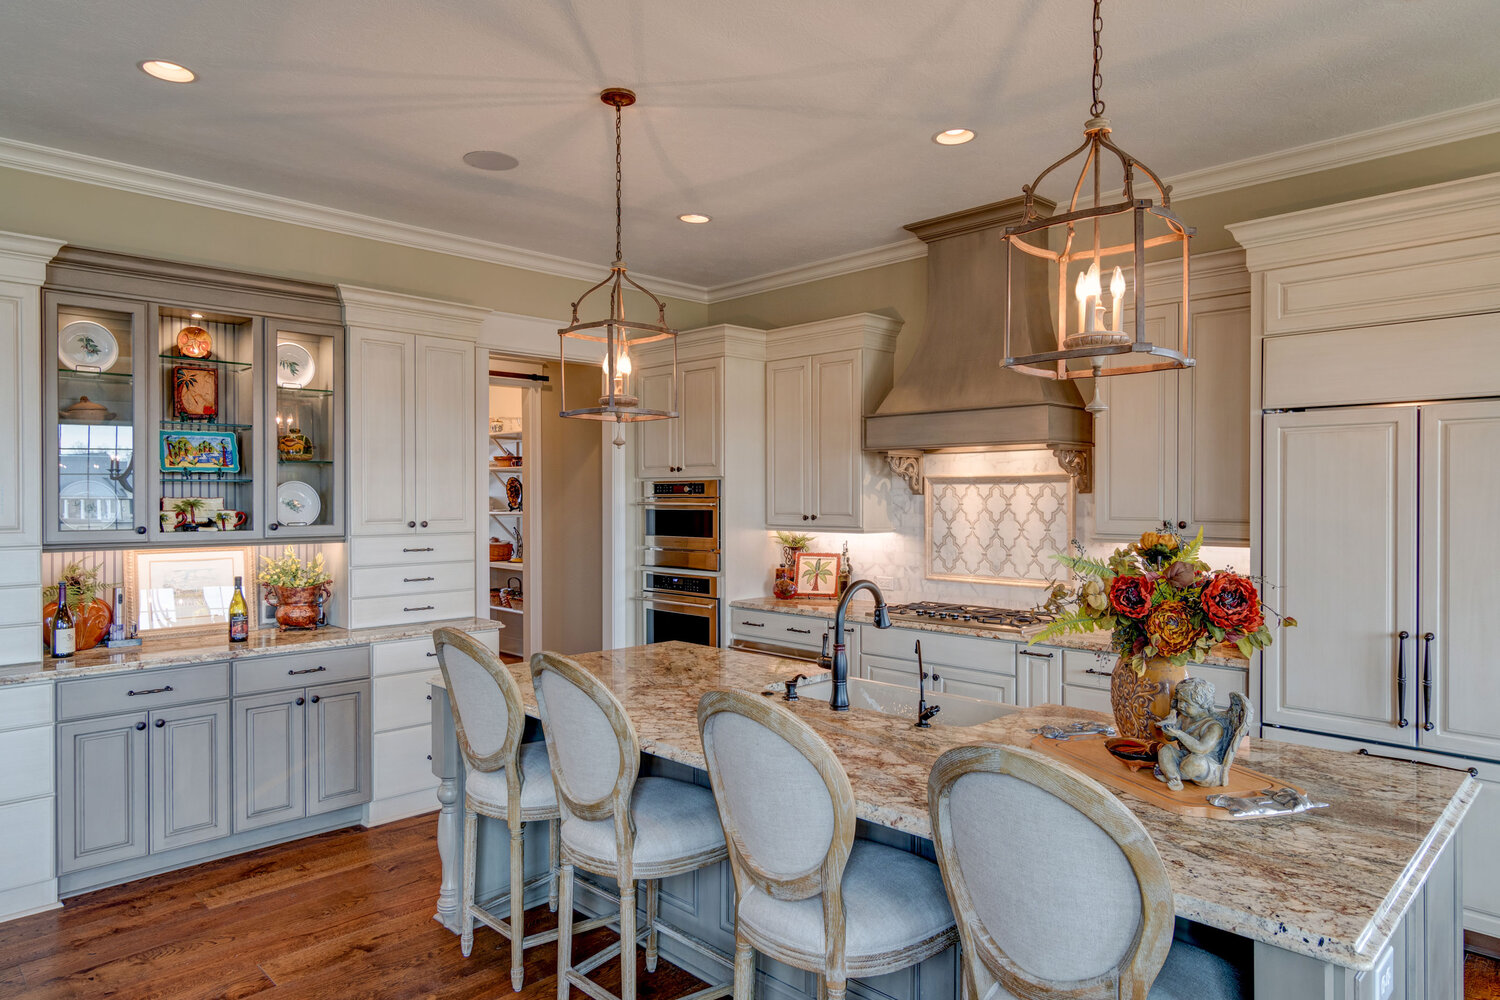 Your custom kitchen is better visualized if you have some tangible examples.